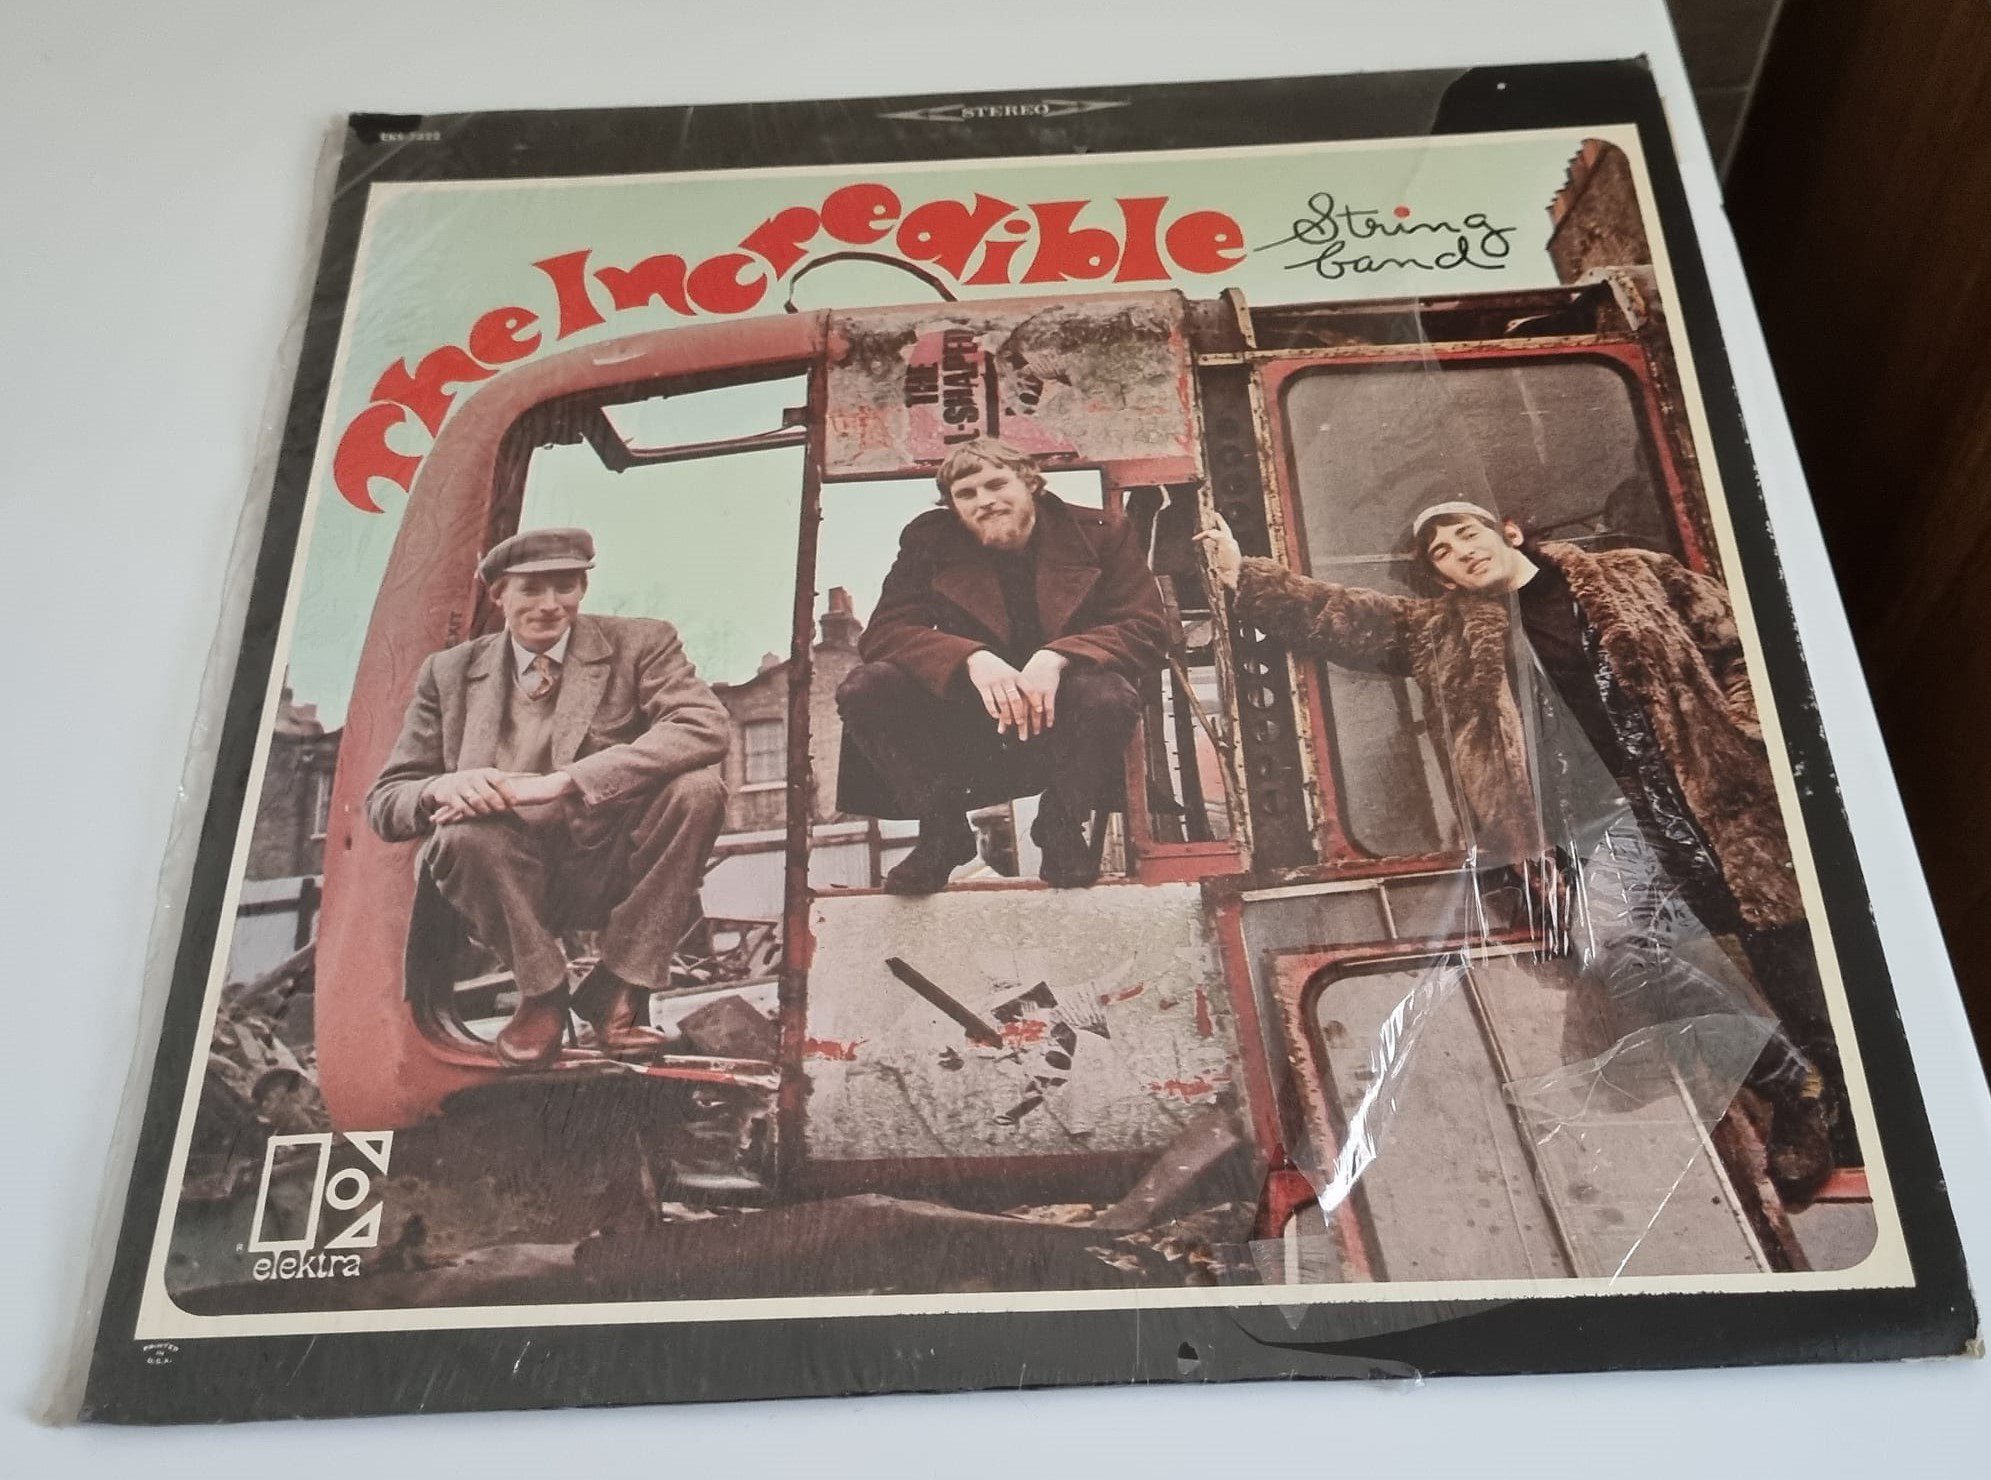 Buy this rare Incredible String Band record by clicking here